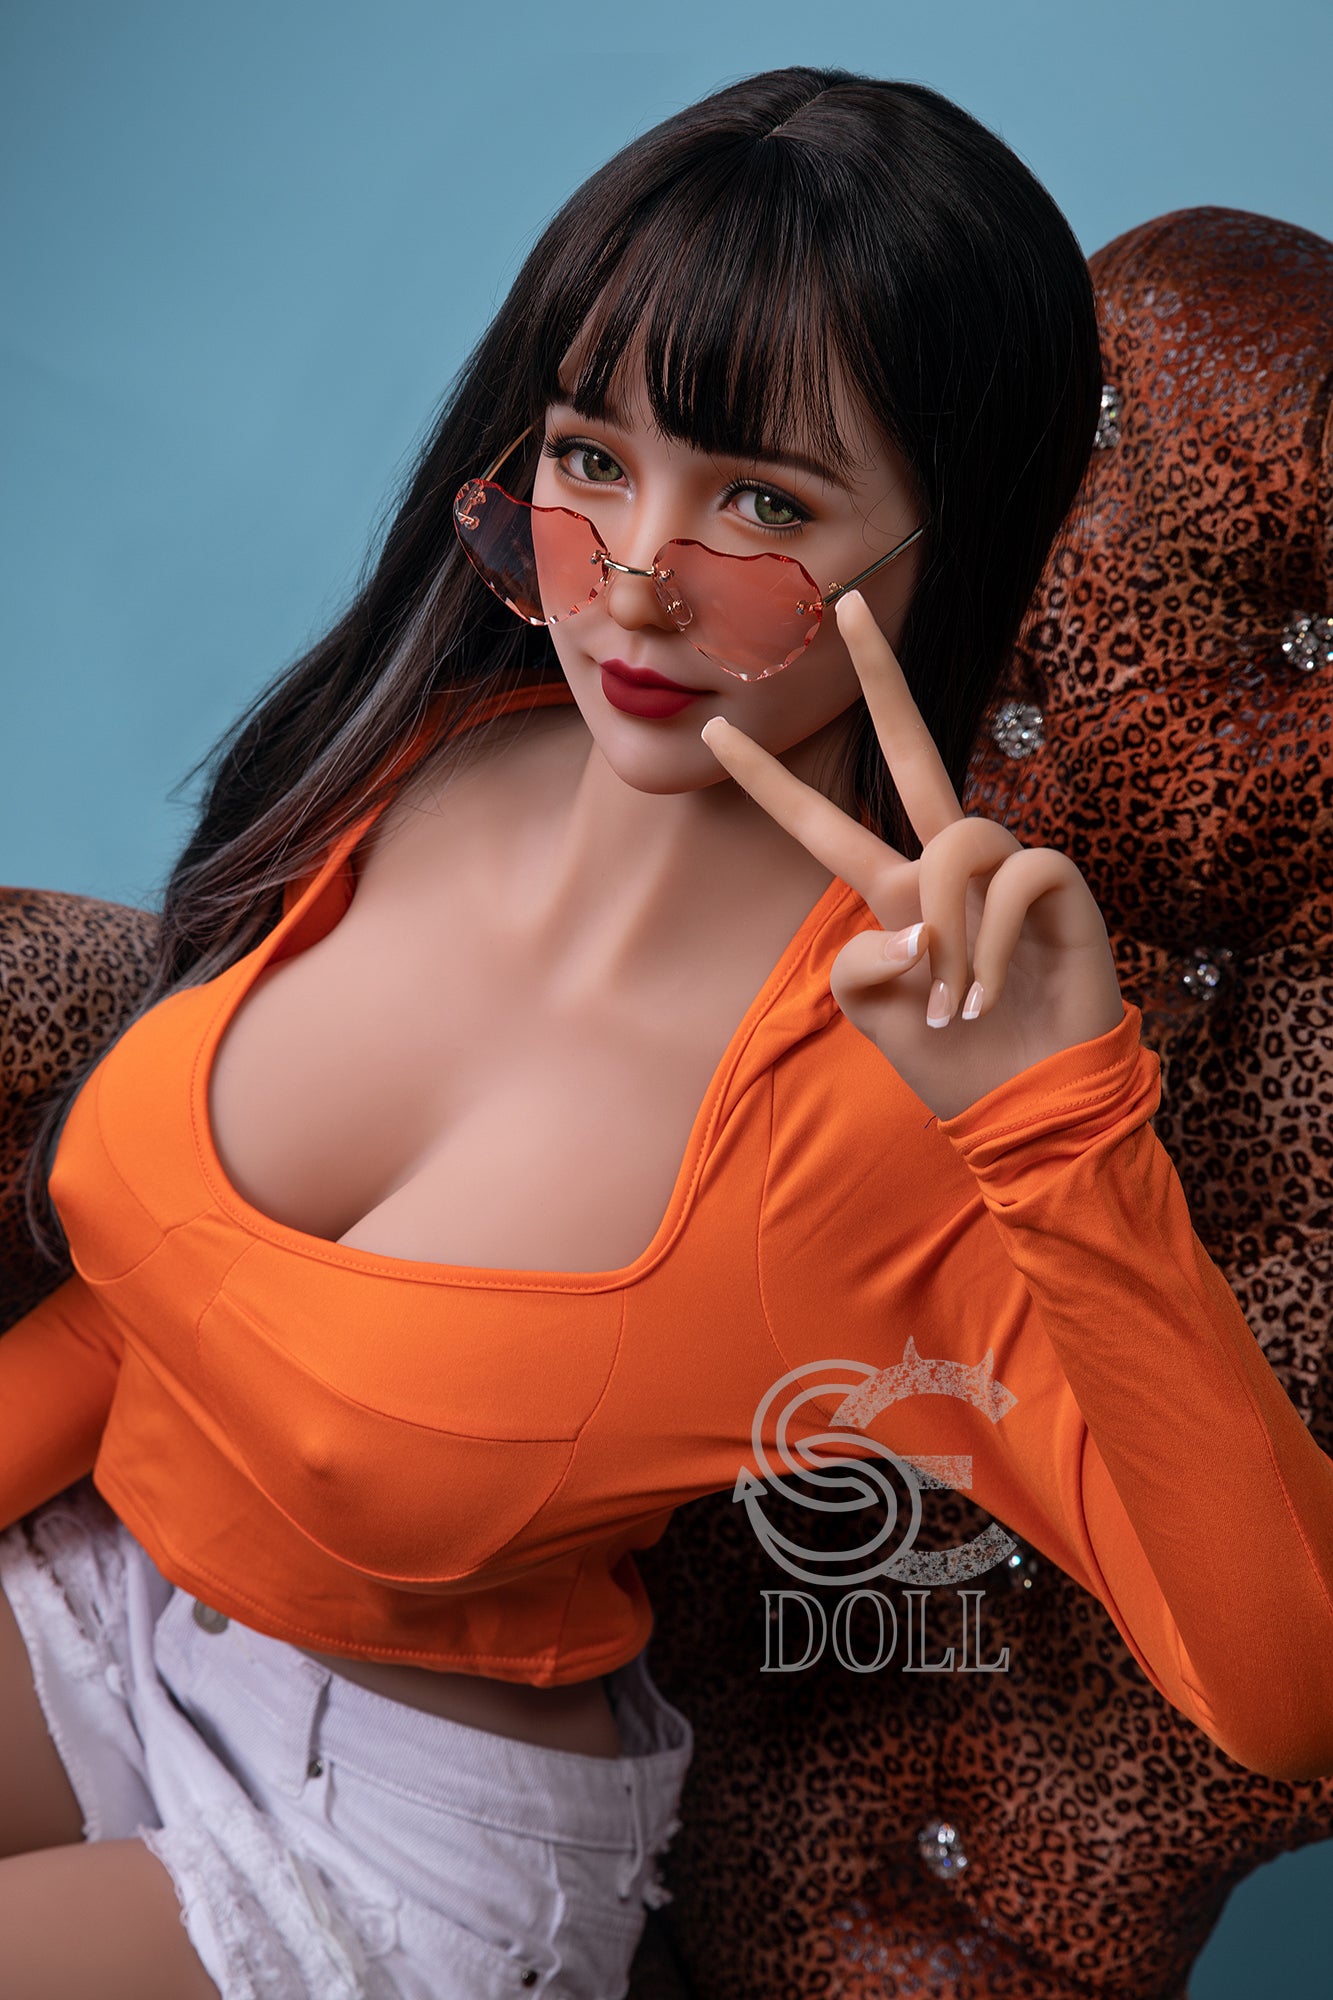 SEDOLL 161 cm F TPE - Selina | Buy Sex Dolls at DOLLS ACTUALLY